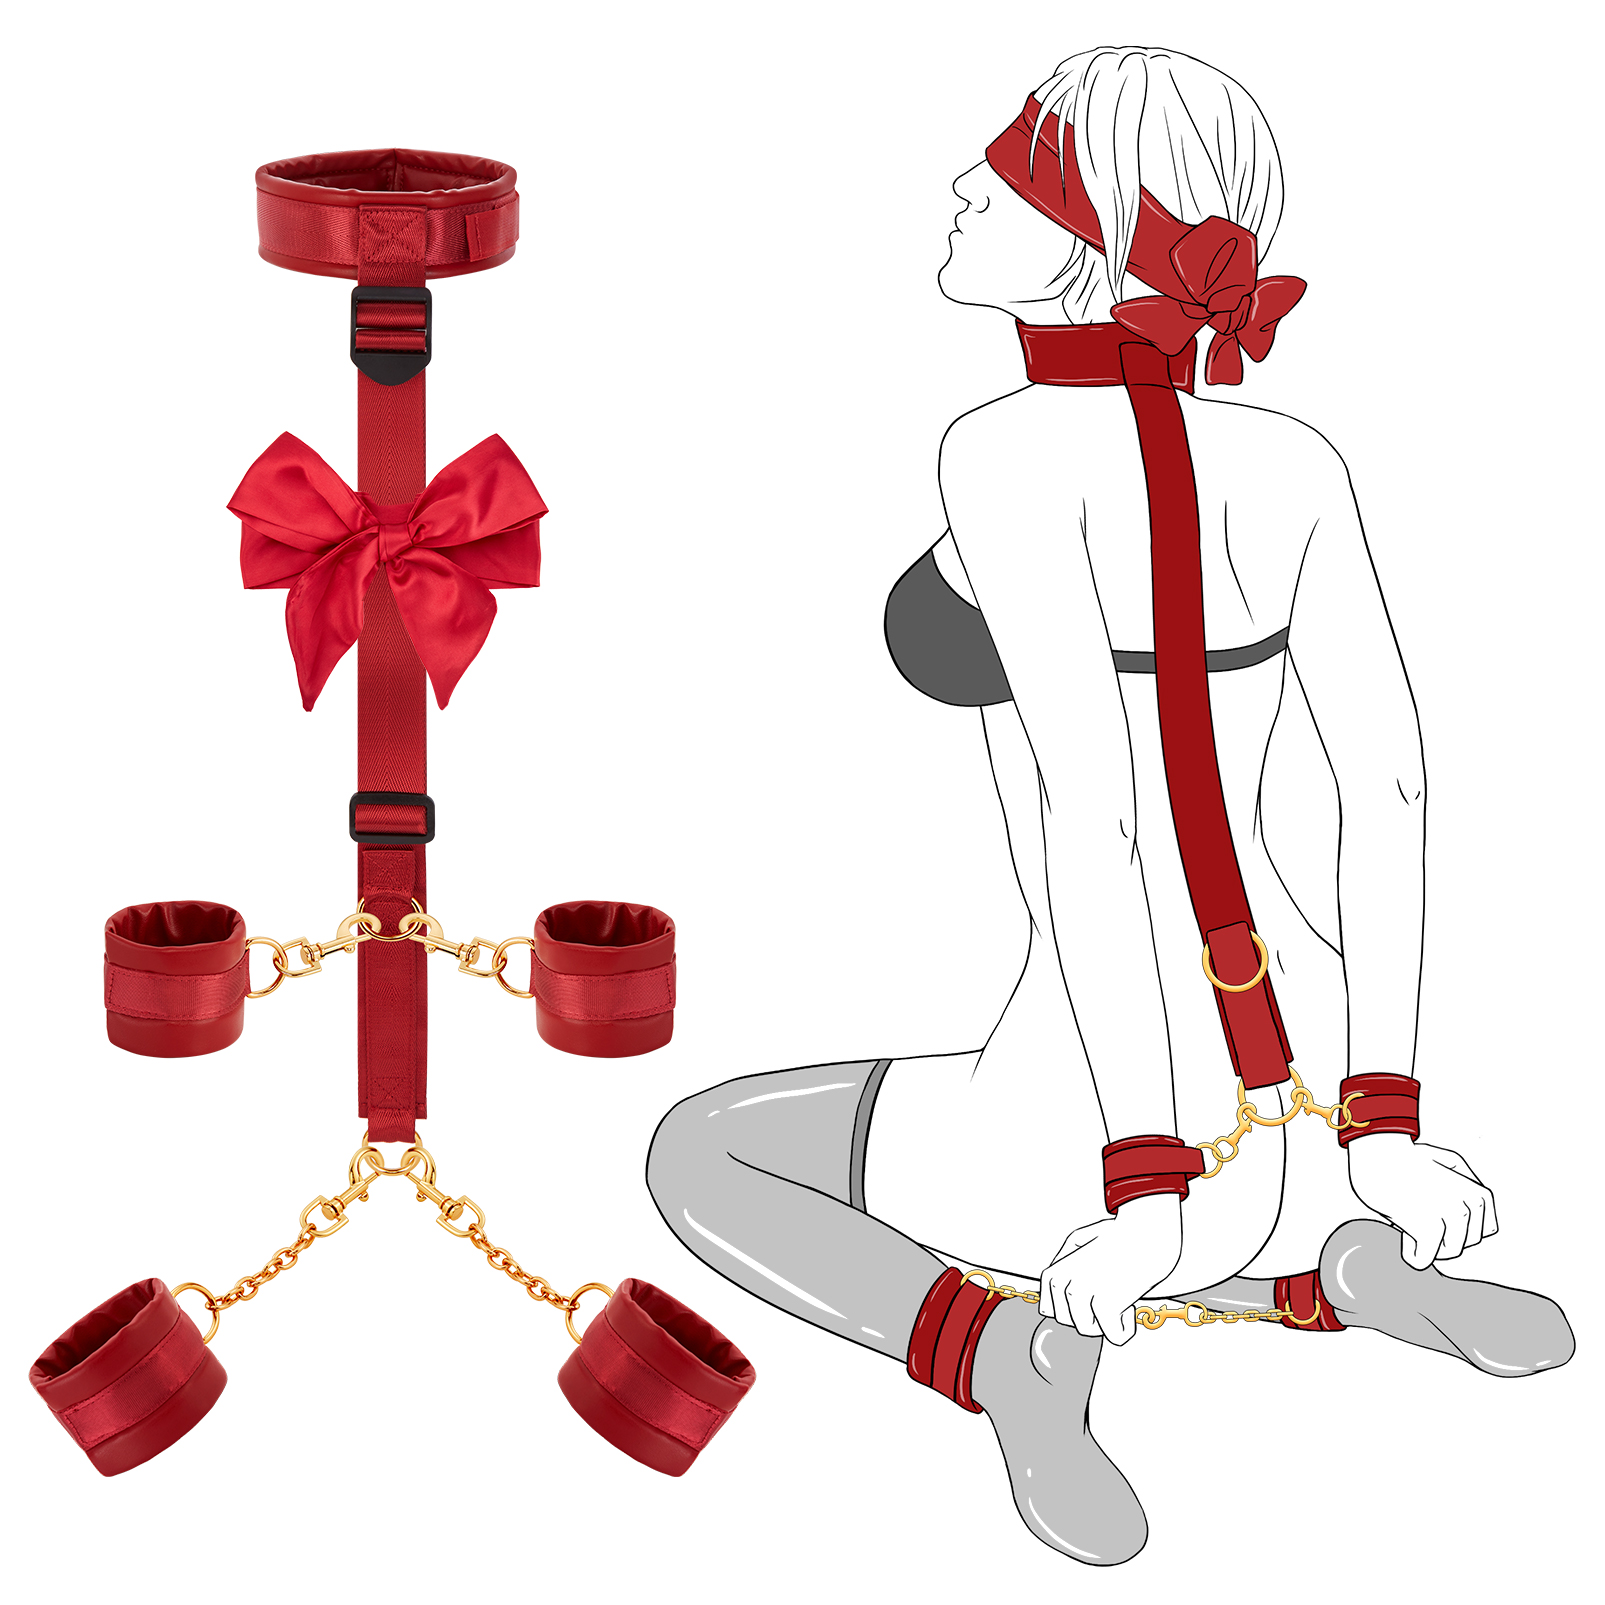 Sex Bondage BDSM Restraints Kit - UTIMI Collar Wrist Behind Back Restraint Ankles Cuffs with Blindfold and Adjustable Straps Handcuffs Sex Adult PU Leather Set BSDM Toys Couples Red